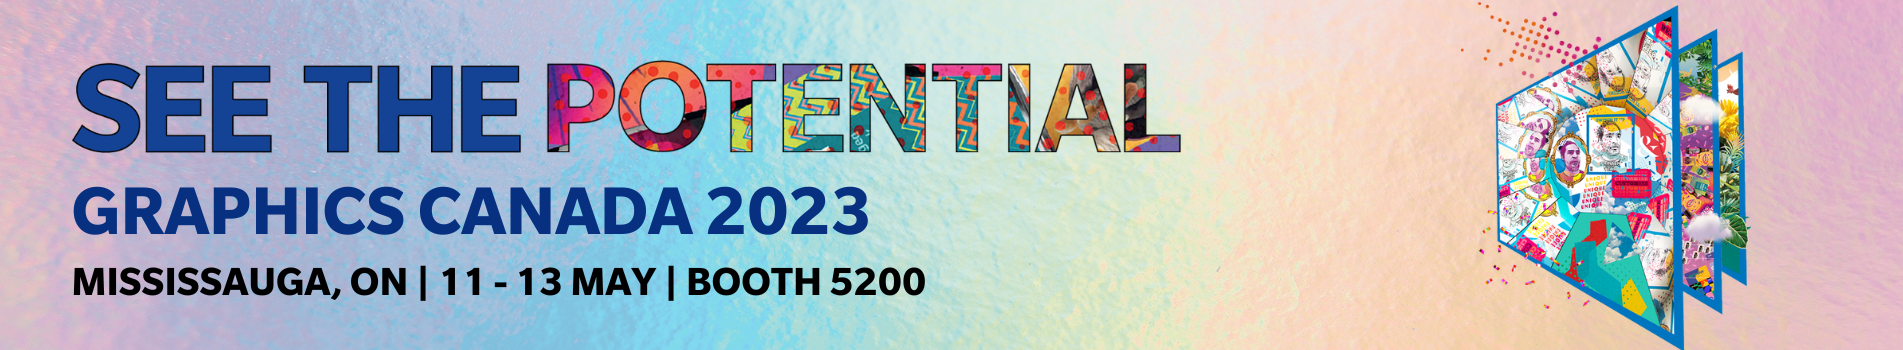 See the Potential - Graphics Canada 2023 Booth 5200